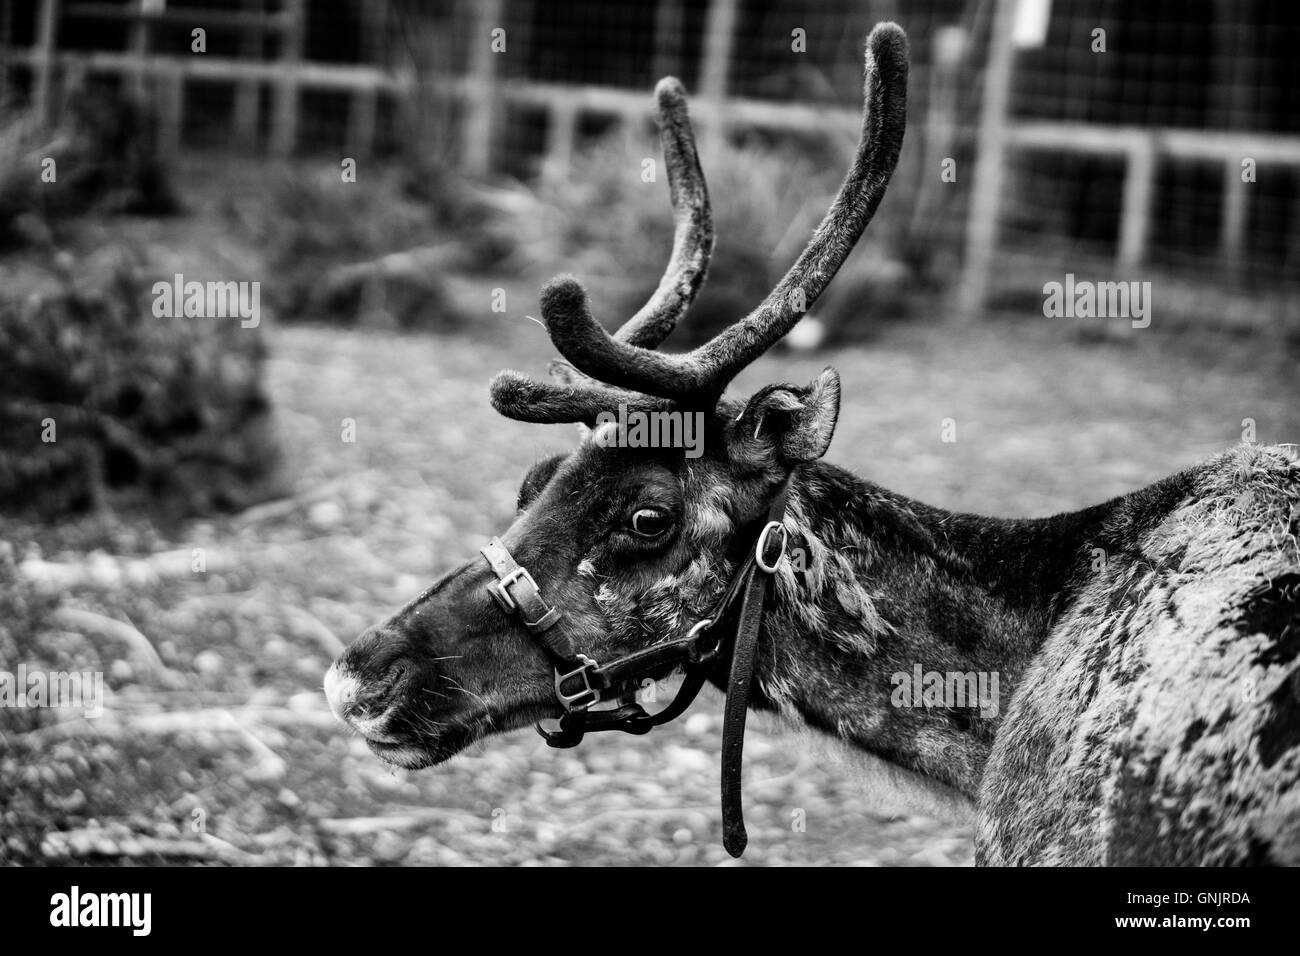 Reindeer Black and White Stock Photos & Images - Alamy